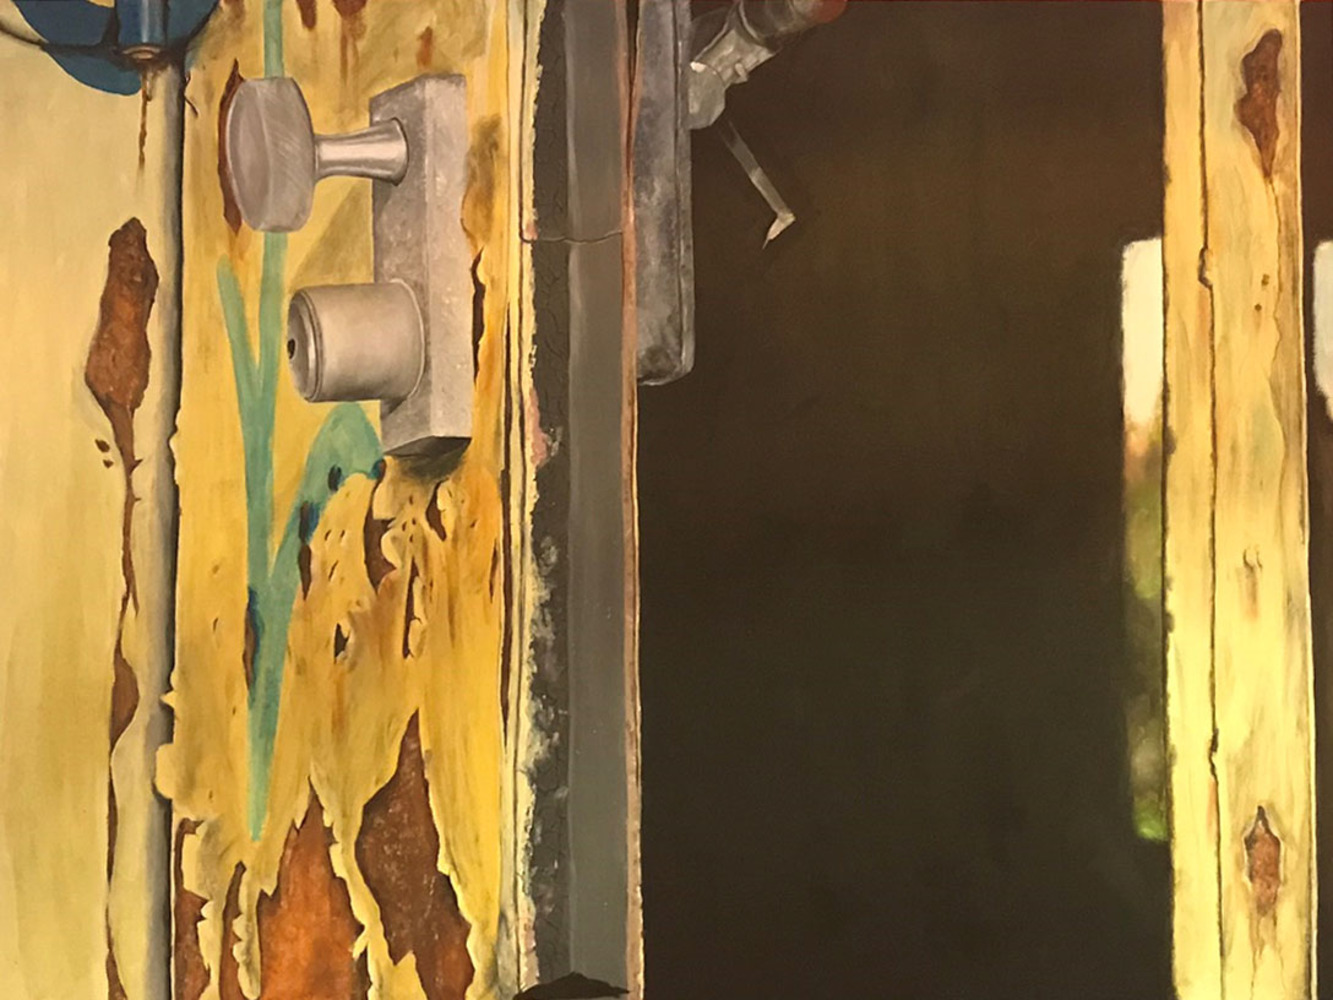 Painting of an old and damaged door.